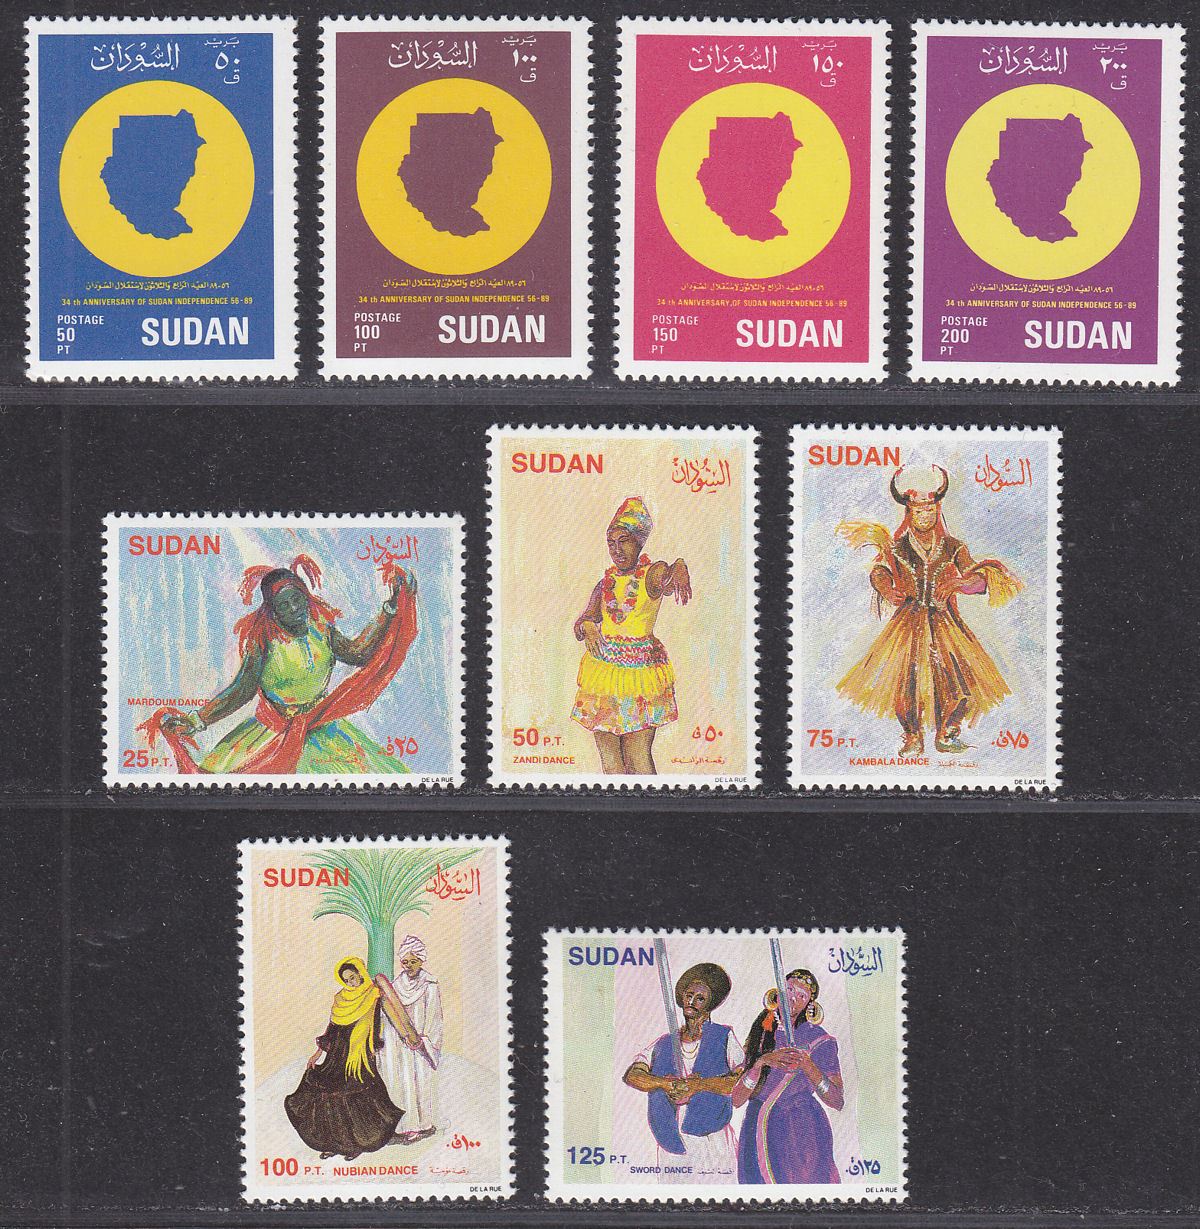 Sudan 1990 34th Anniv of Independence / Traditional Dances Sets Mint cat £11